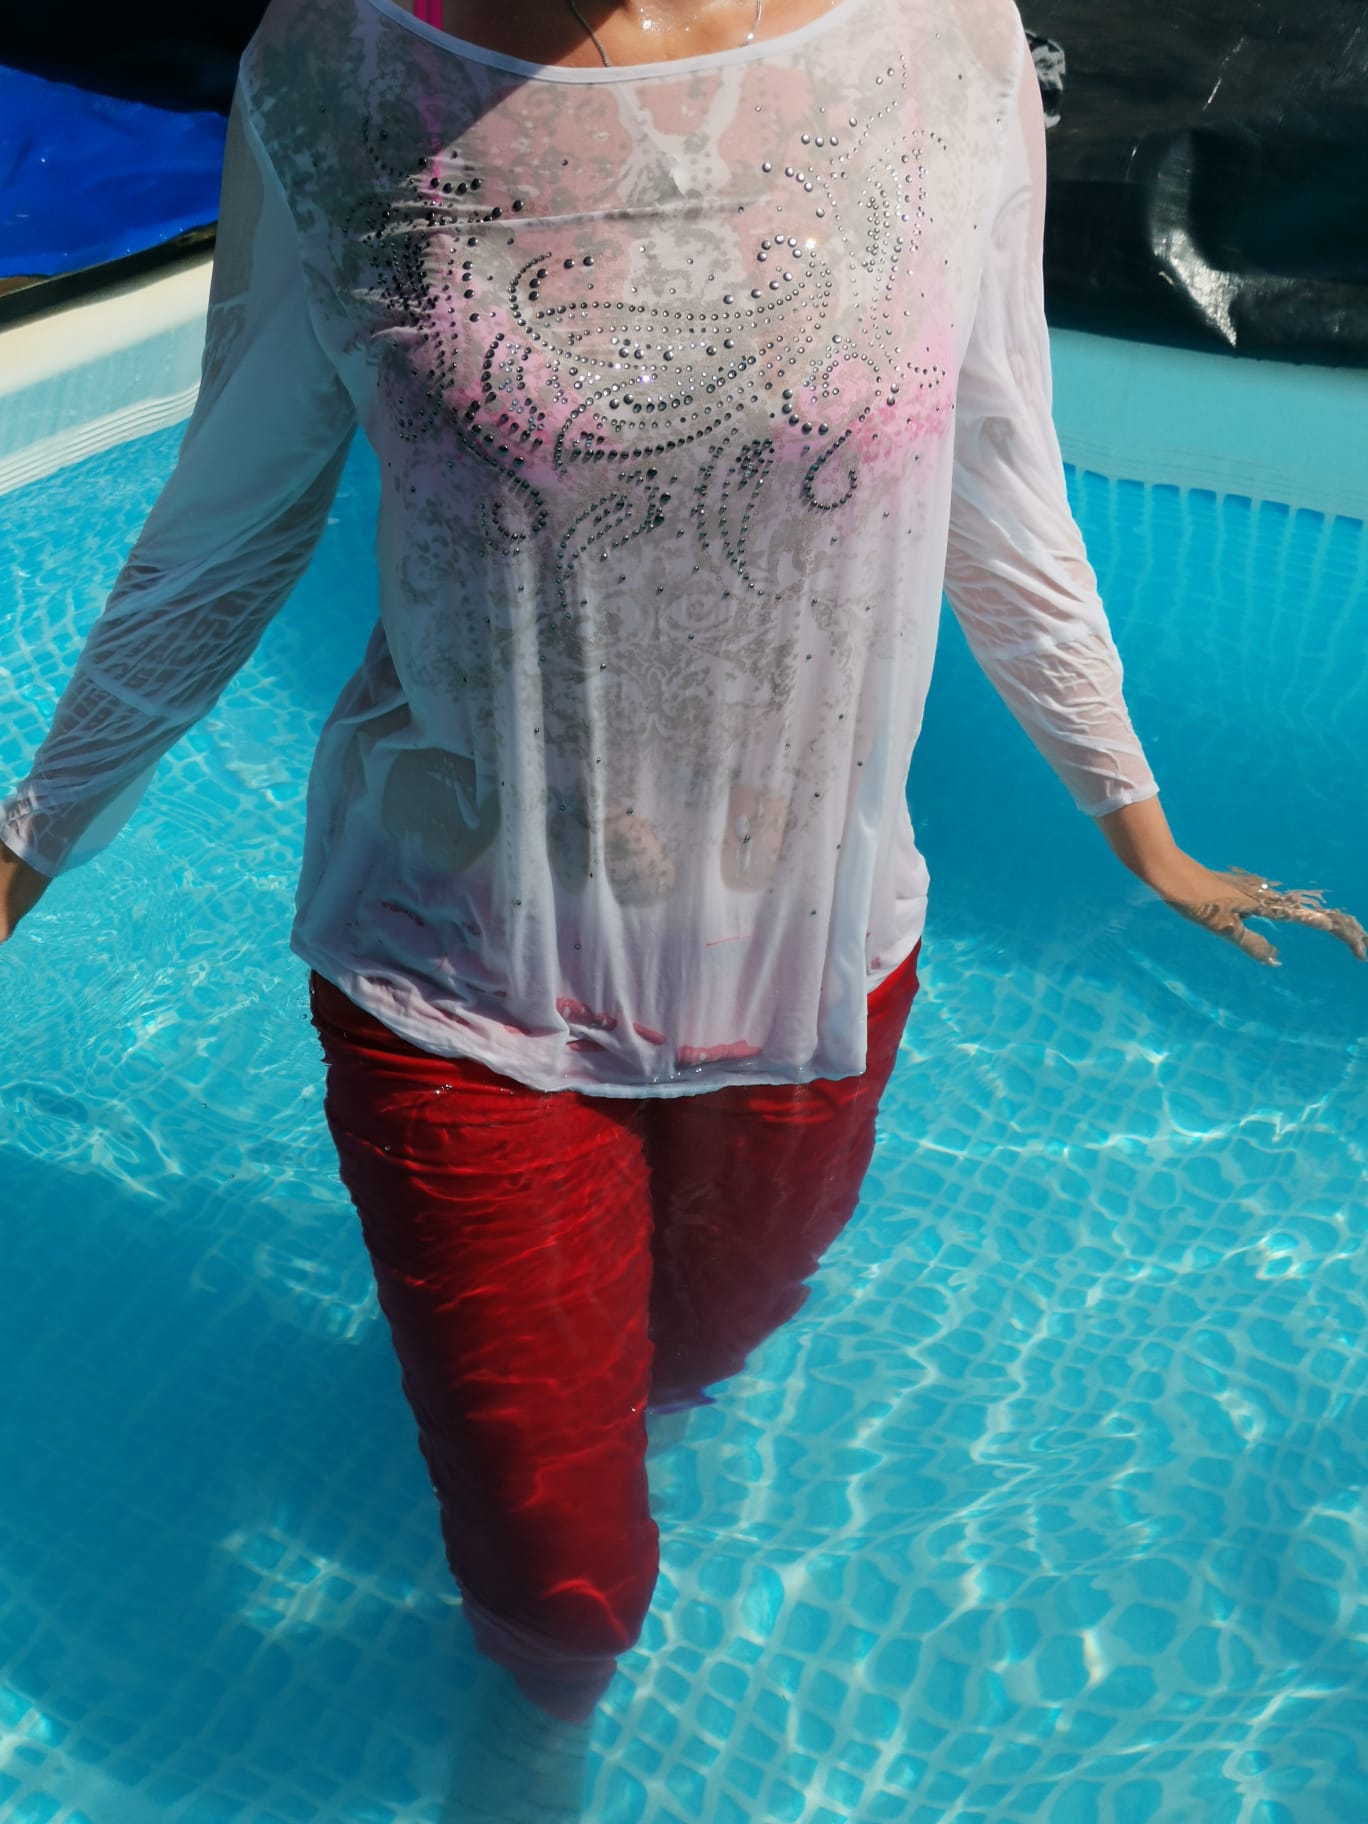 Rote Jeans im Pool